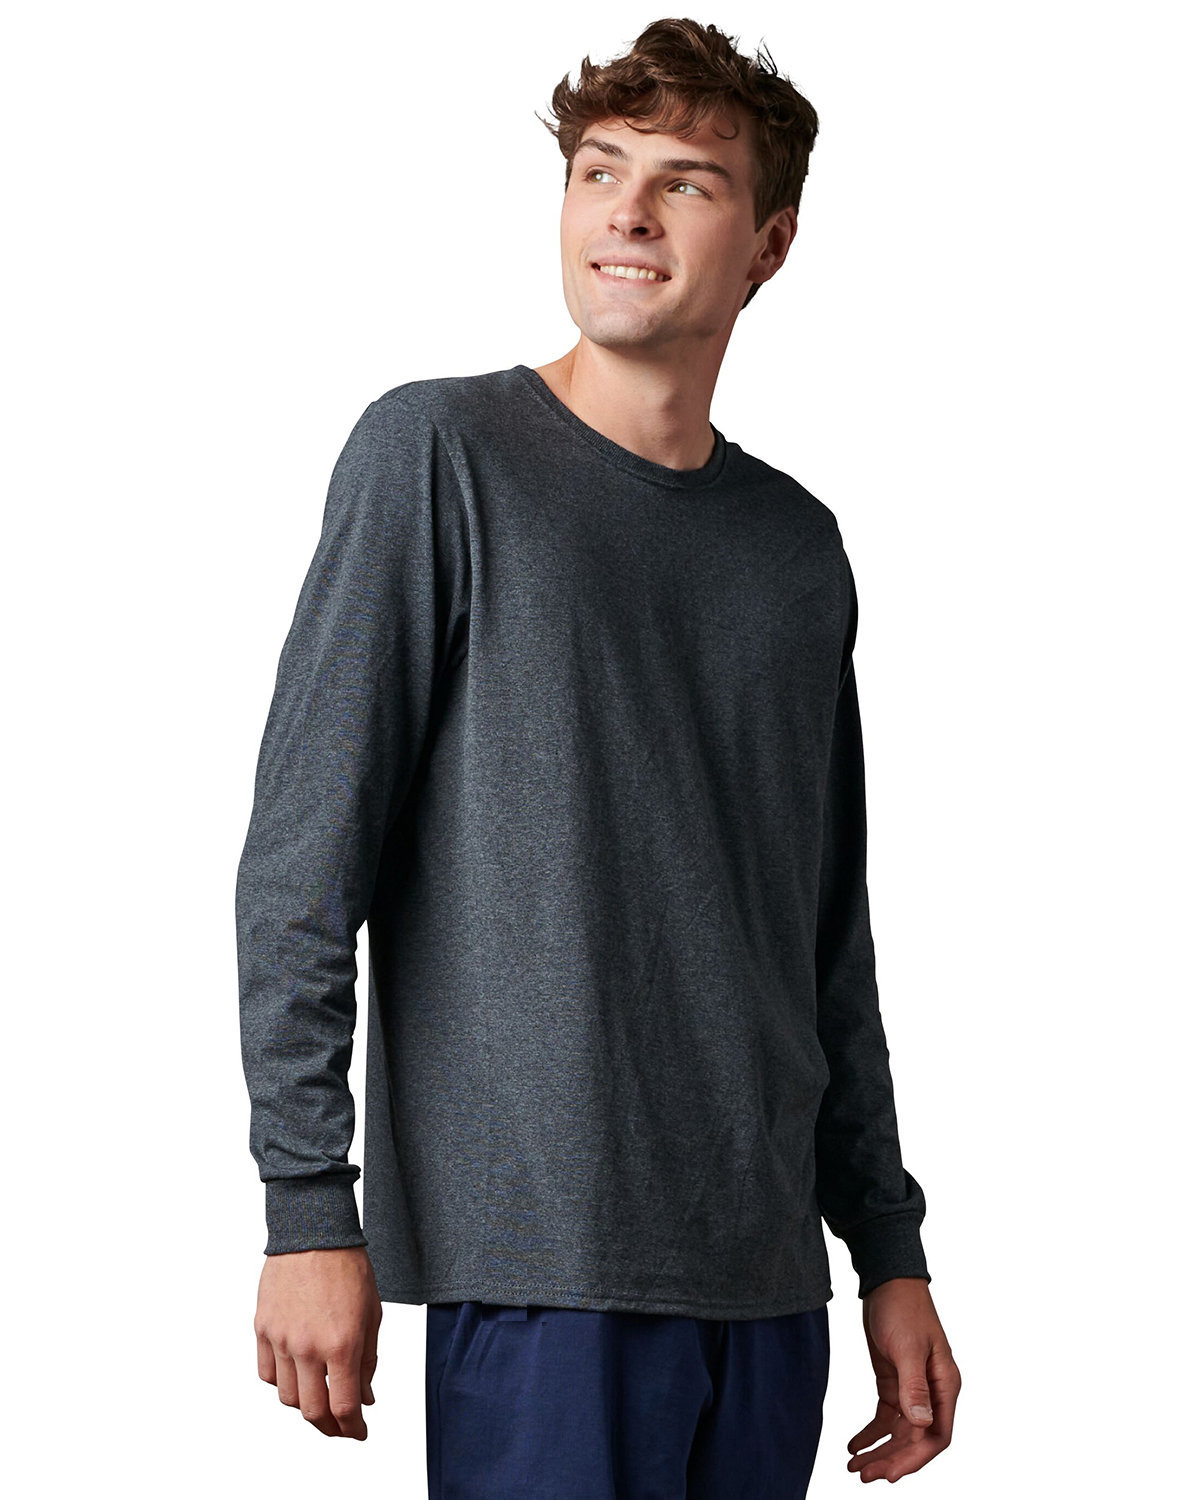 Russell Athletic Unisex Cotton Classic Long-Sleeve T-Shirt CHARCOAL GREY 